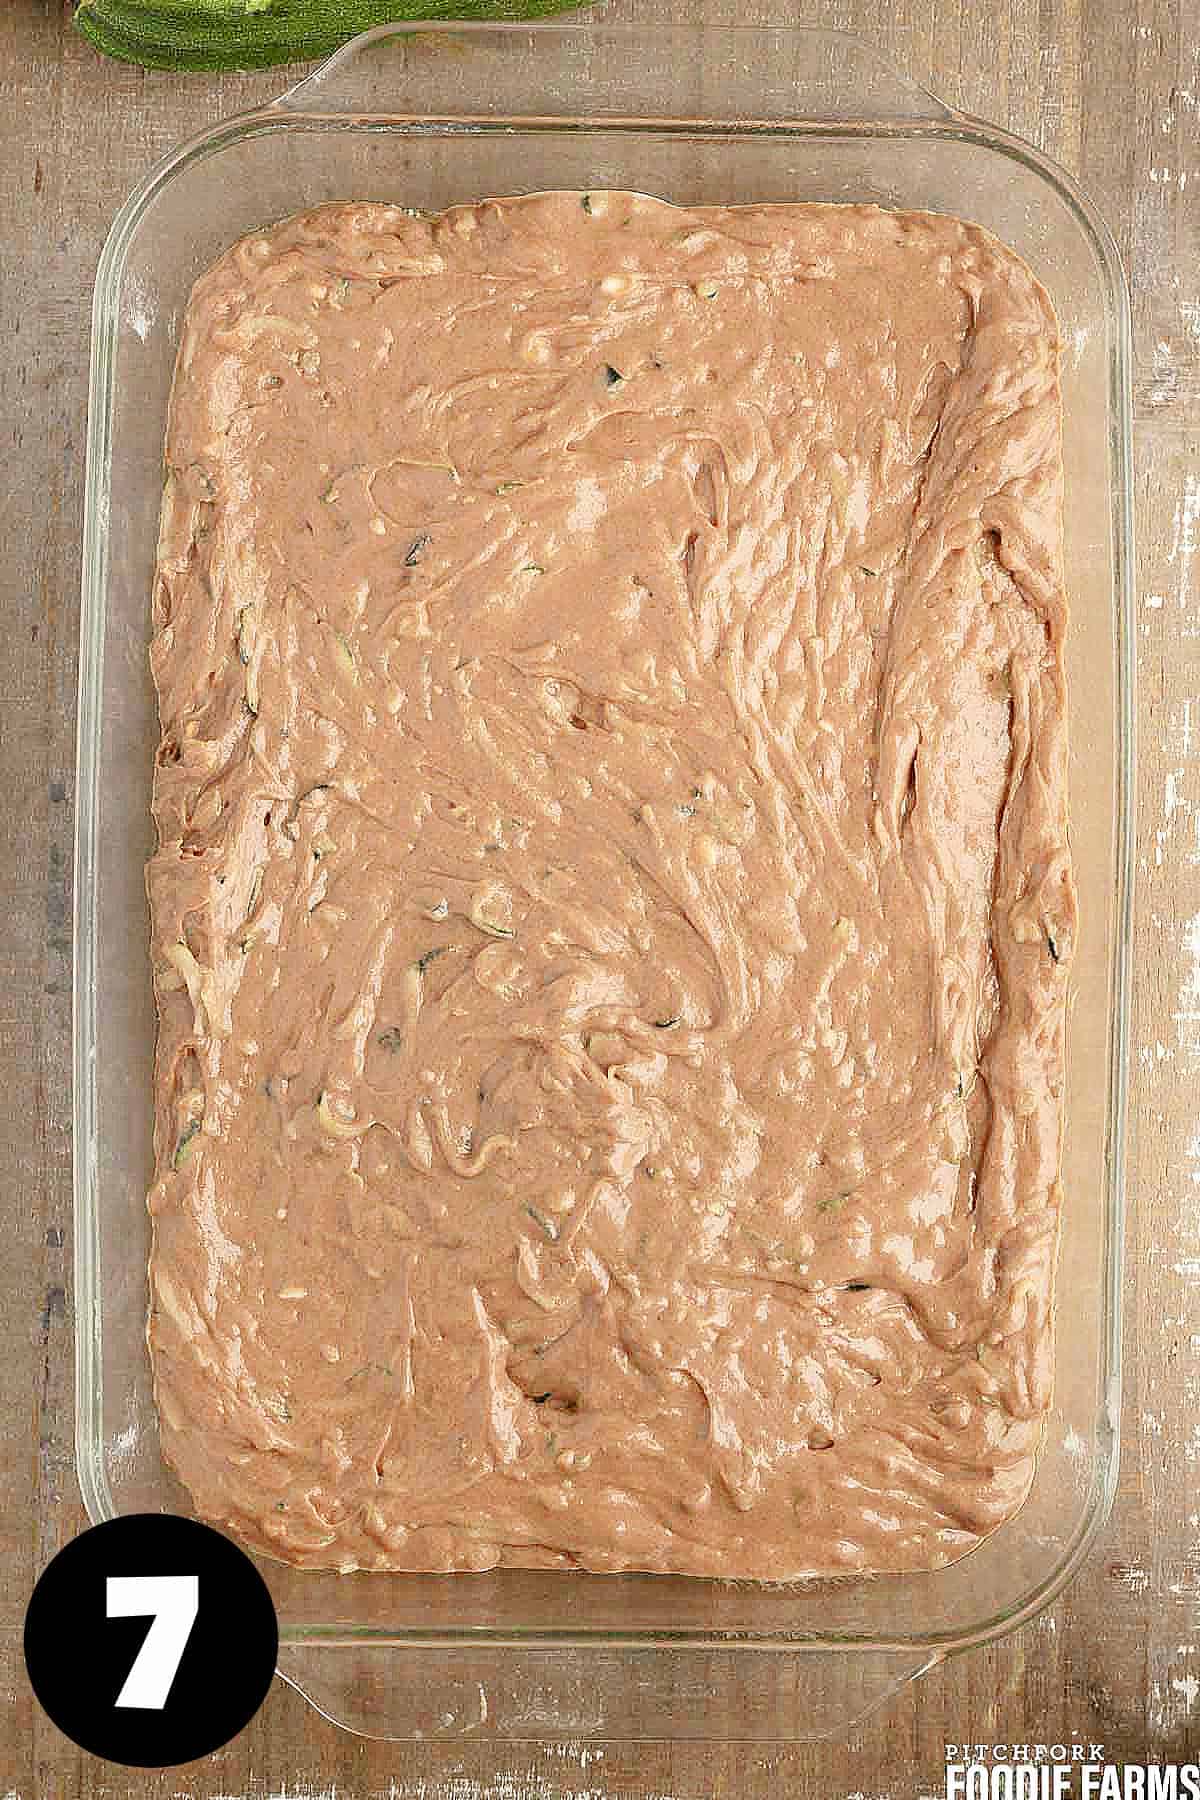 A chocolate cake in a baking pan.